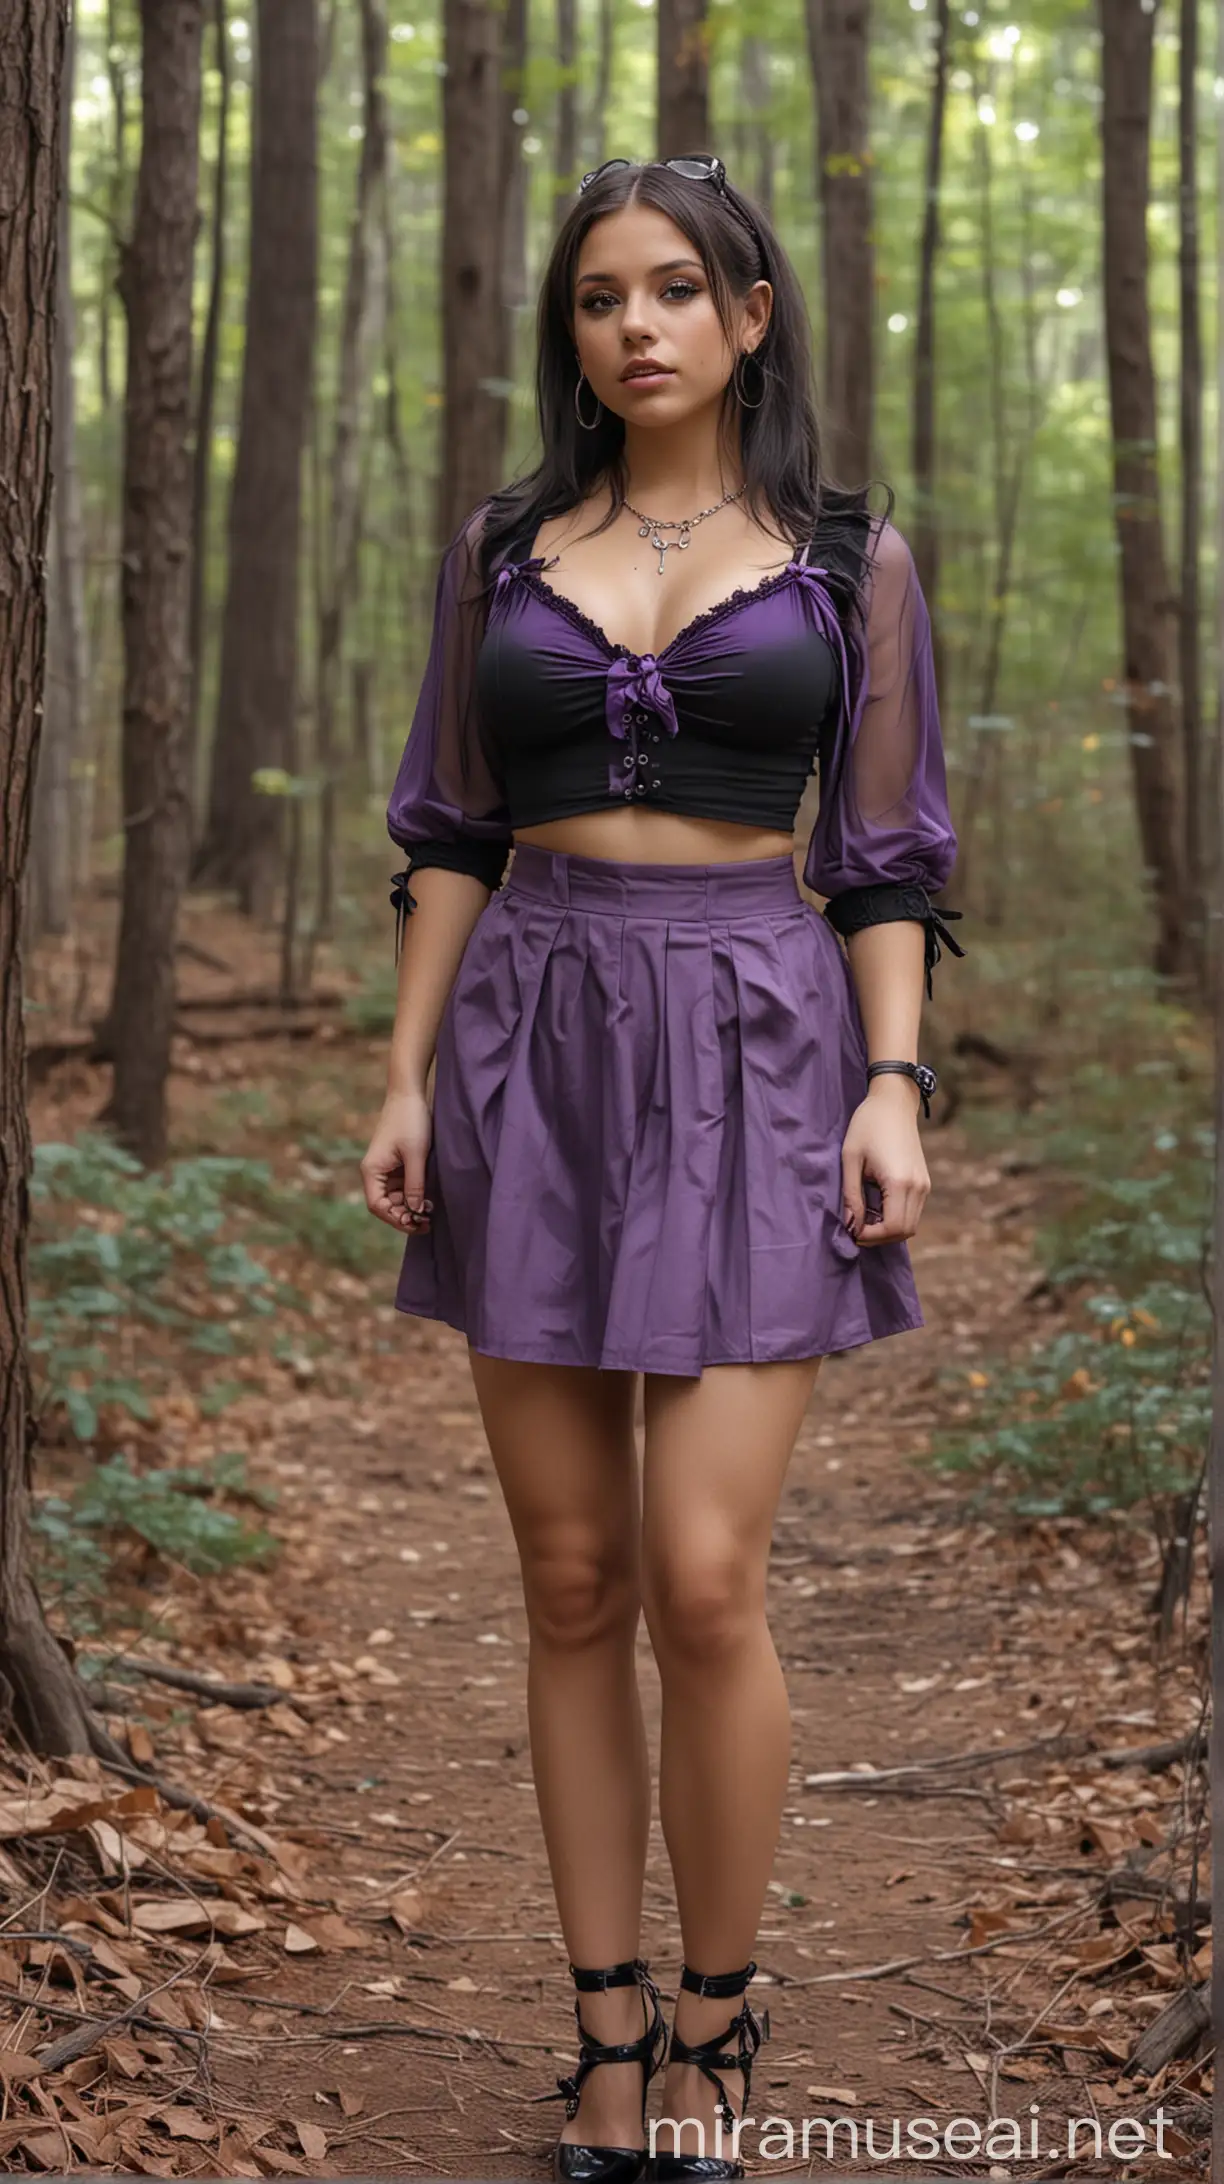 Beautiful USA Girl with Hair Ribbon and Accessories in Forest Setting